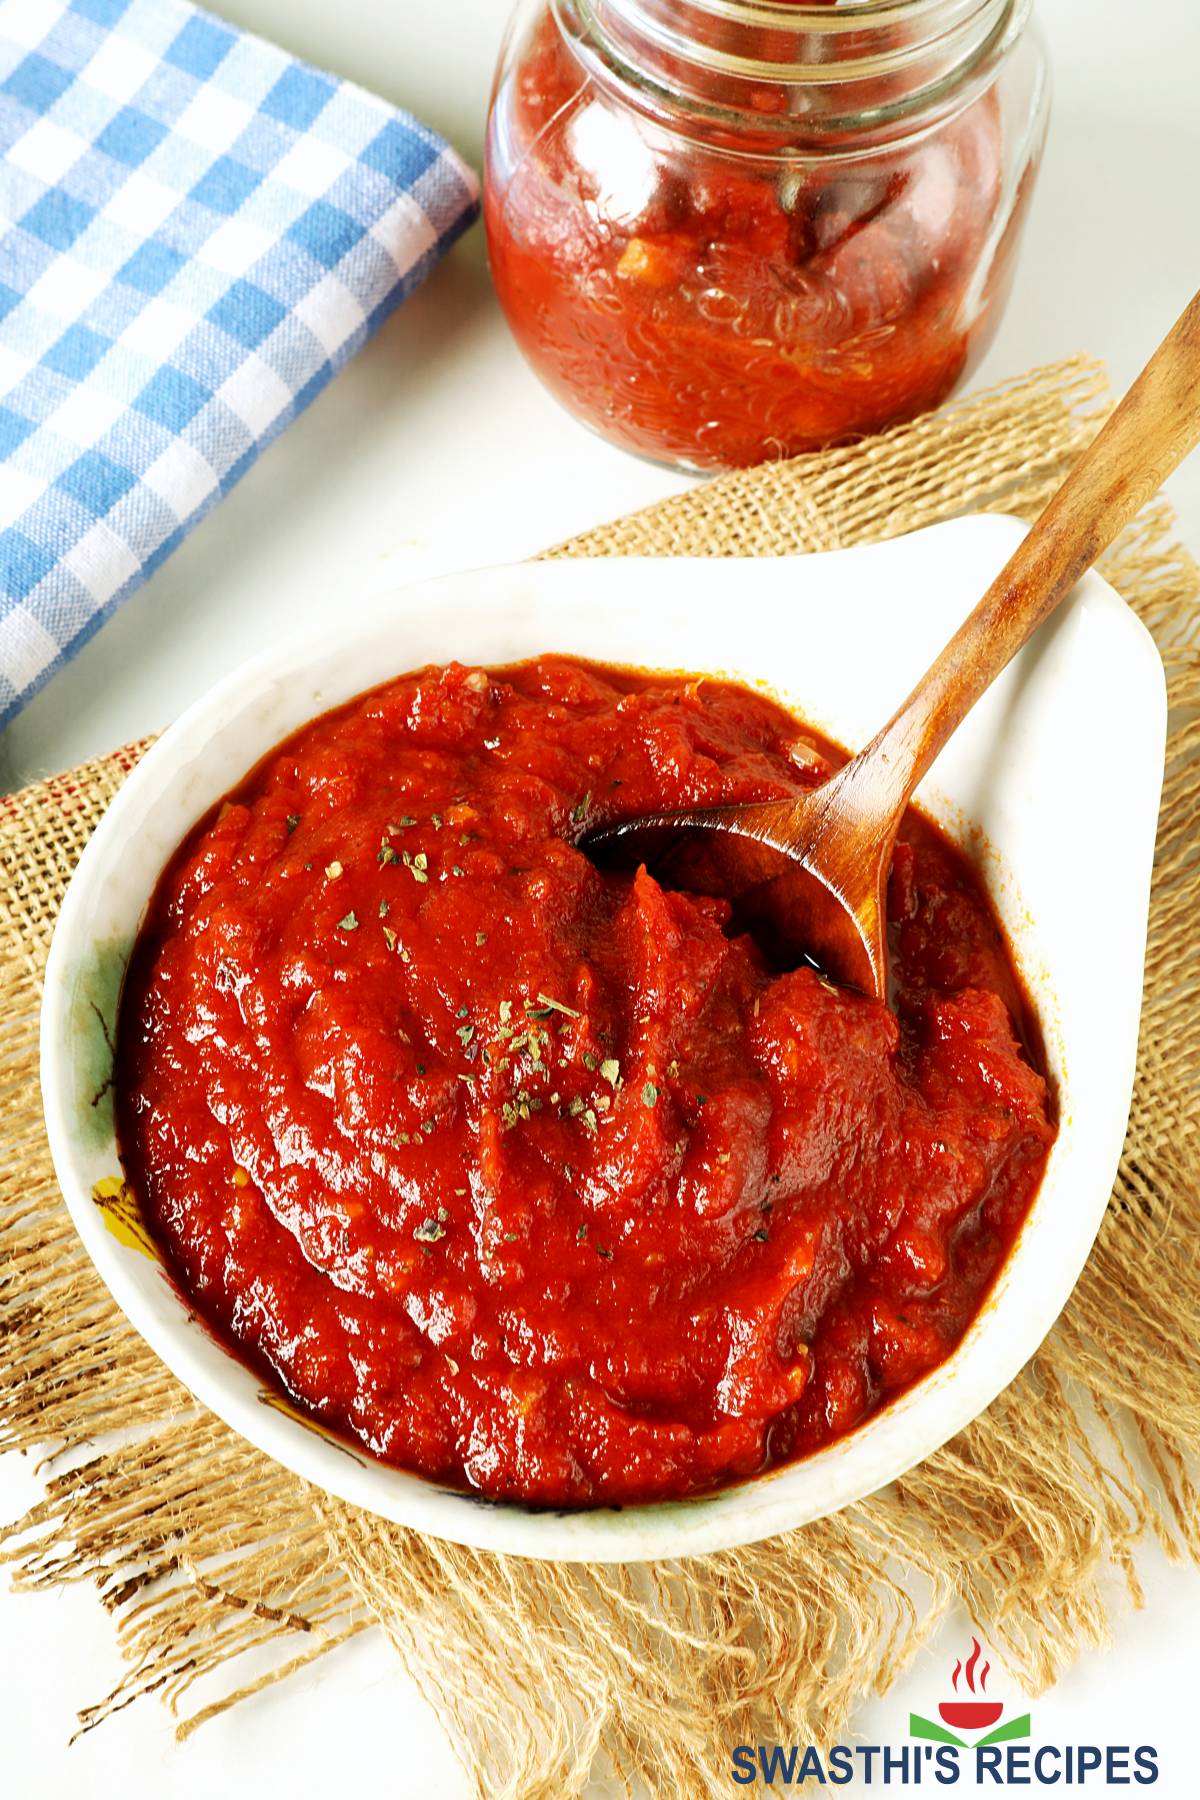 Pizza Sauce Recipe With Fresh Tomatoes - Swasthi's Recipes